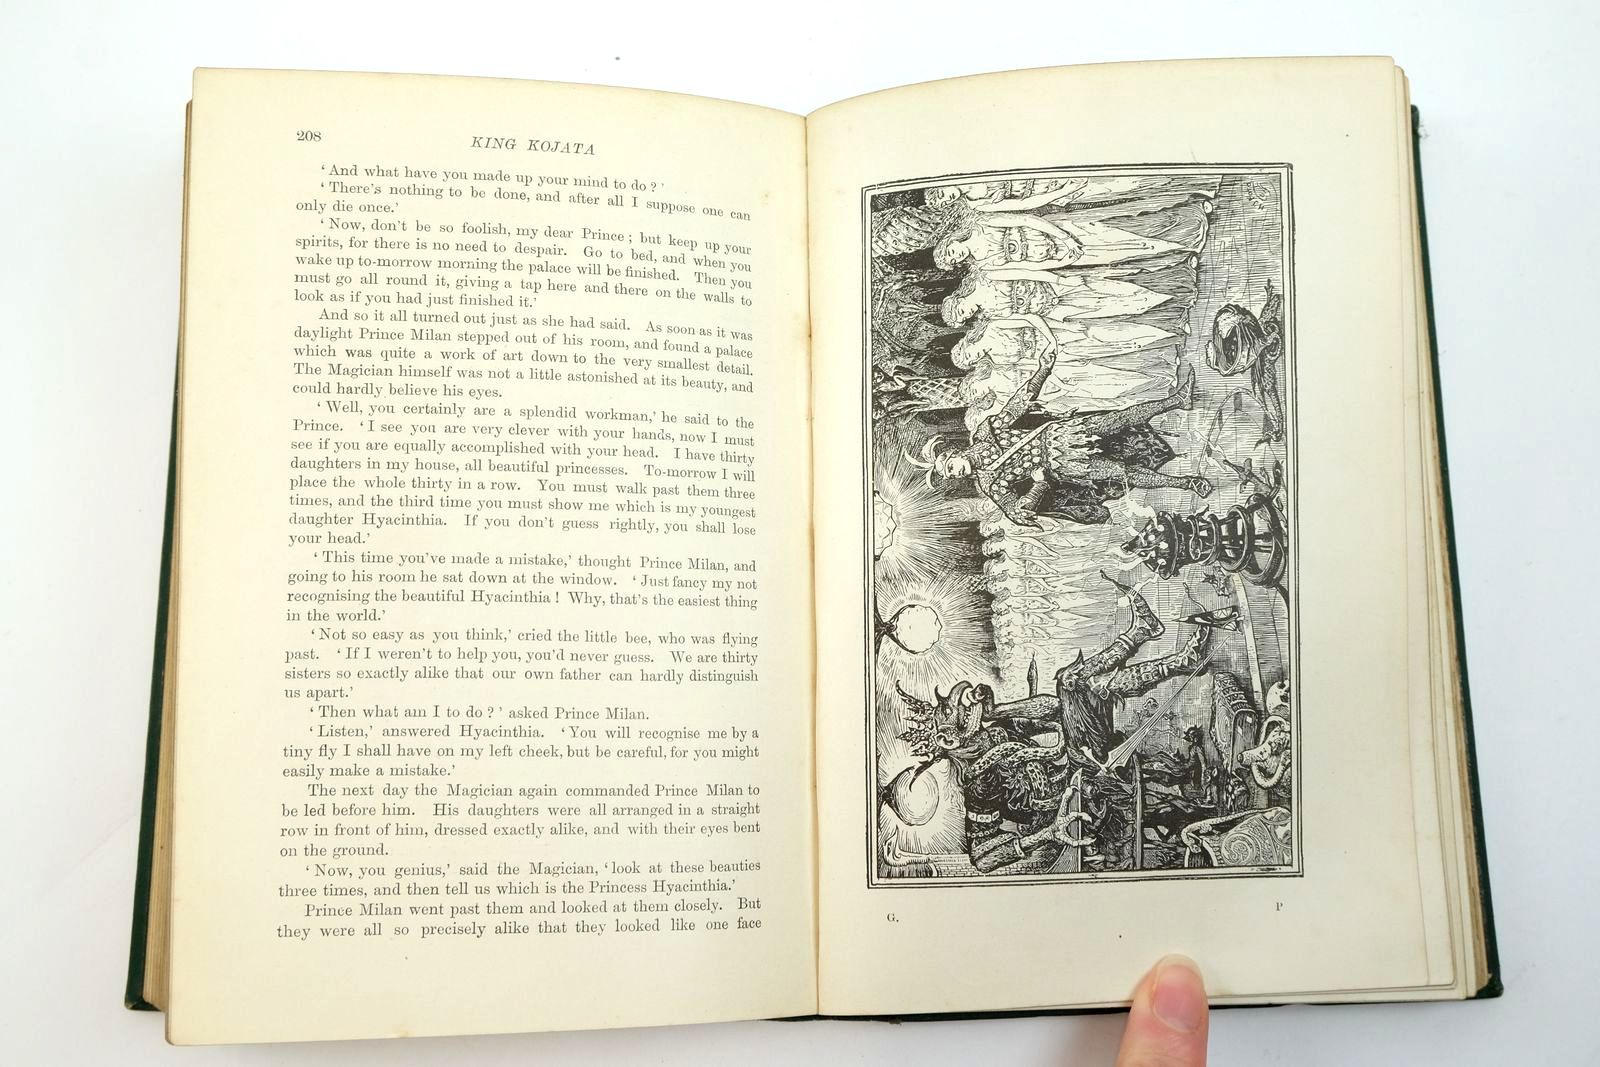 Photo of THE GREEN FAIRY BOOK written by Lang, Andrew illustrated by Ford, H.J. published by Longmans, Green & Co. (STOCK CODE: 2139757)  for sale by Stella & Rose's Books